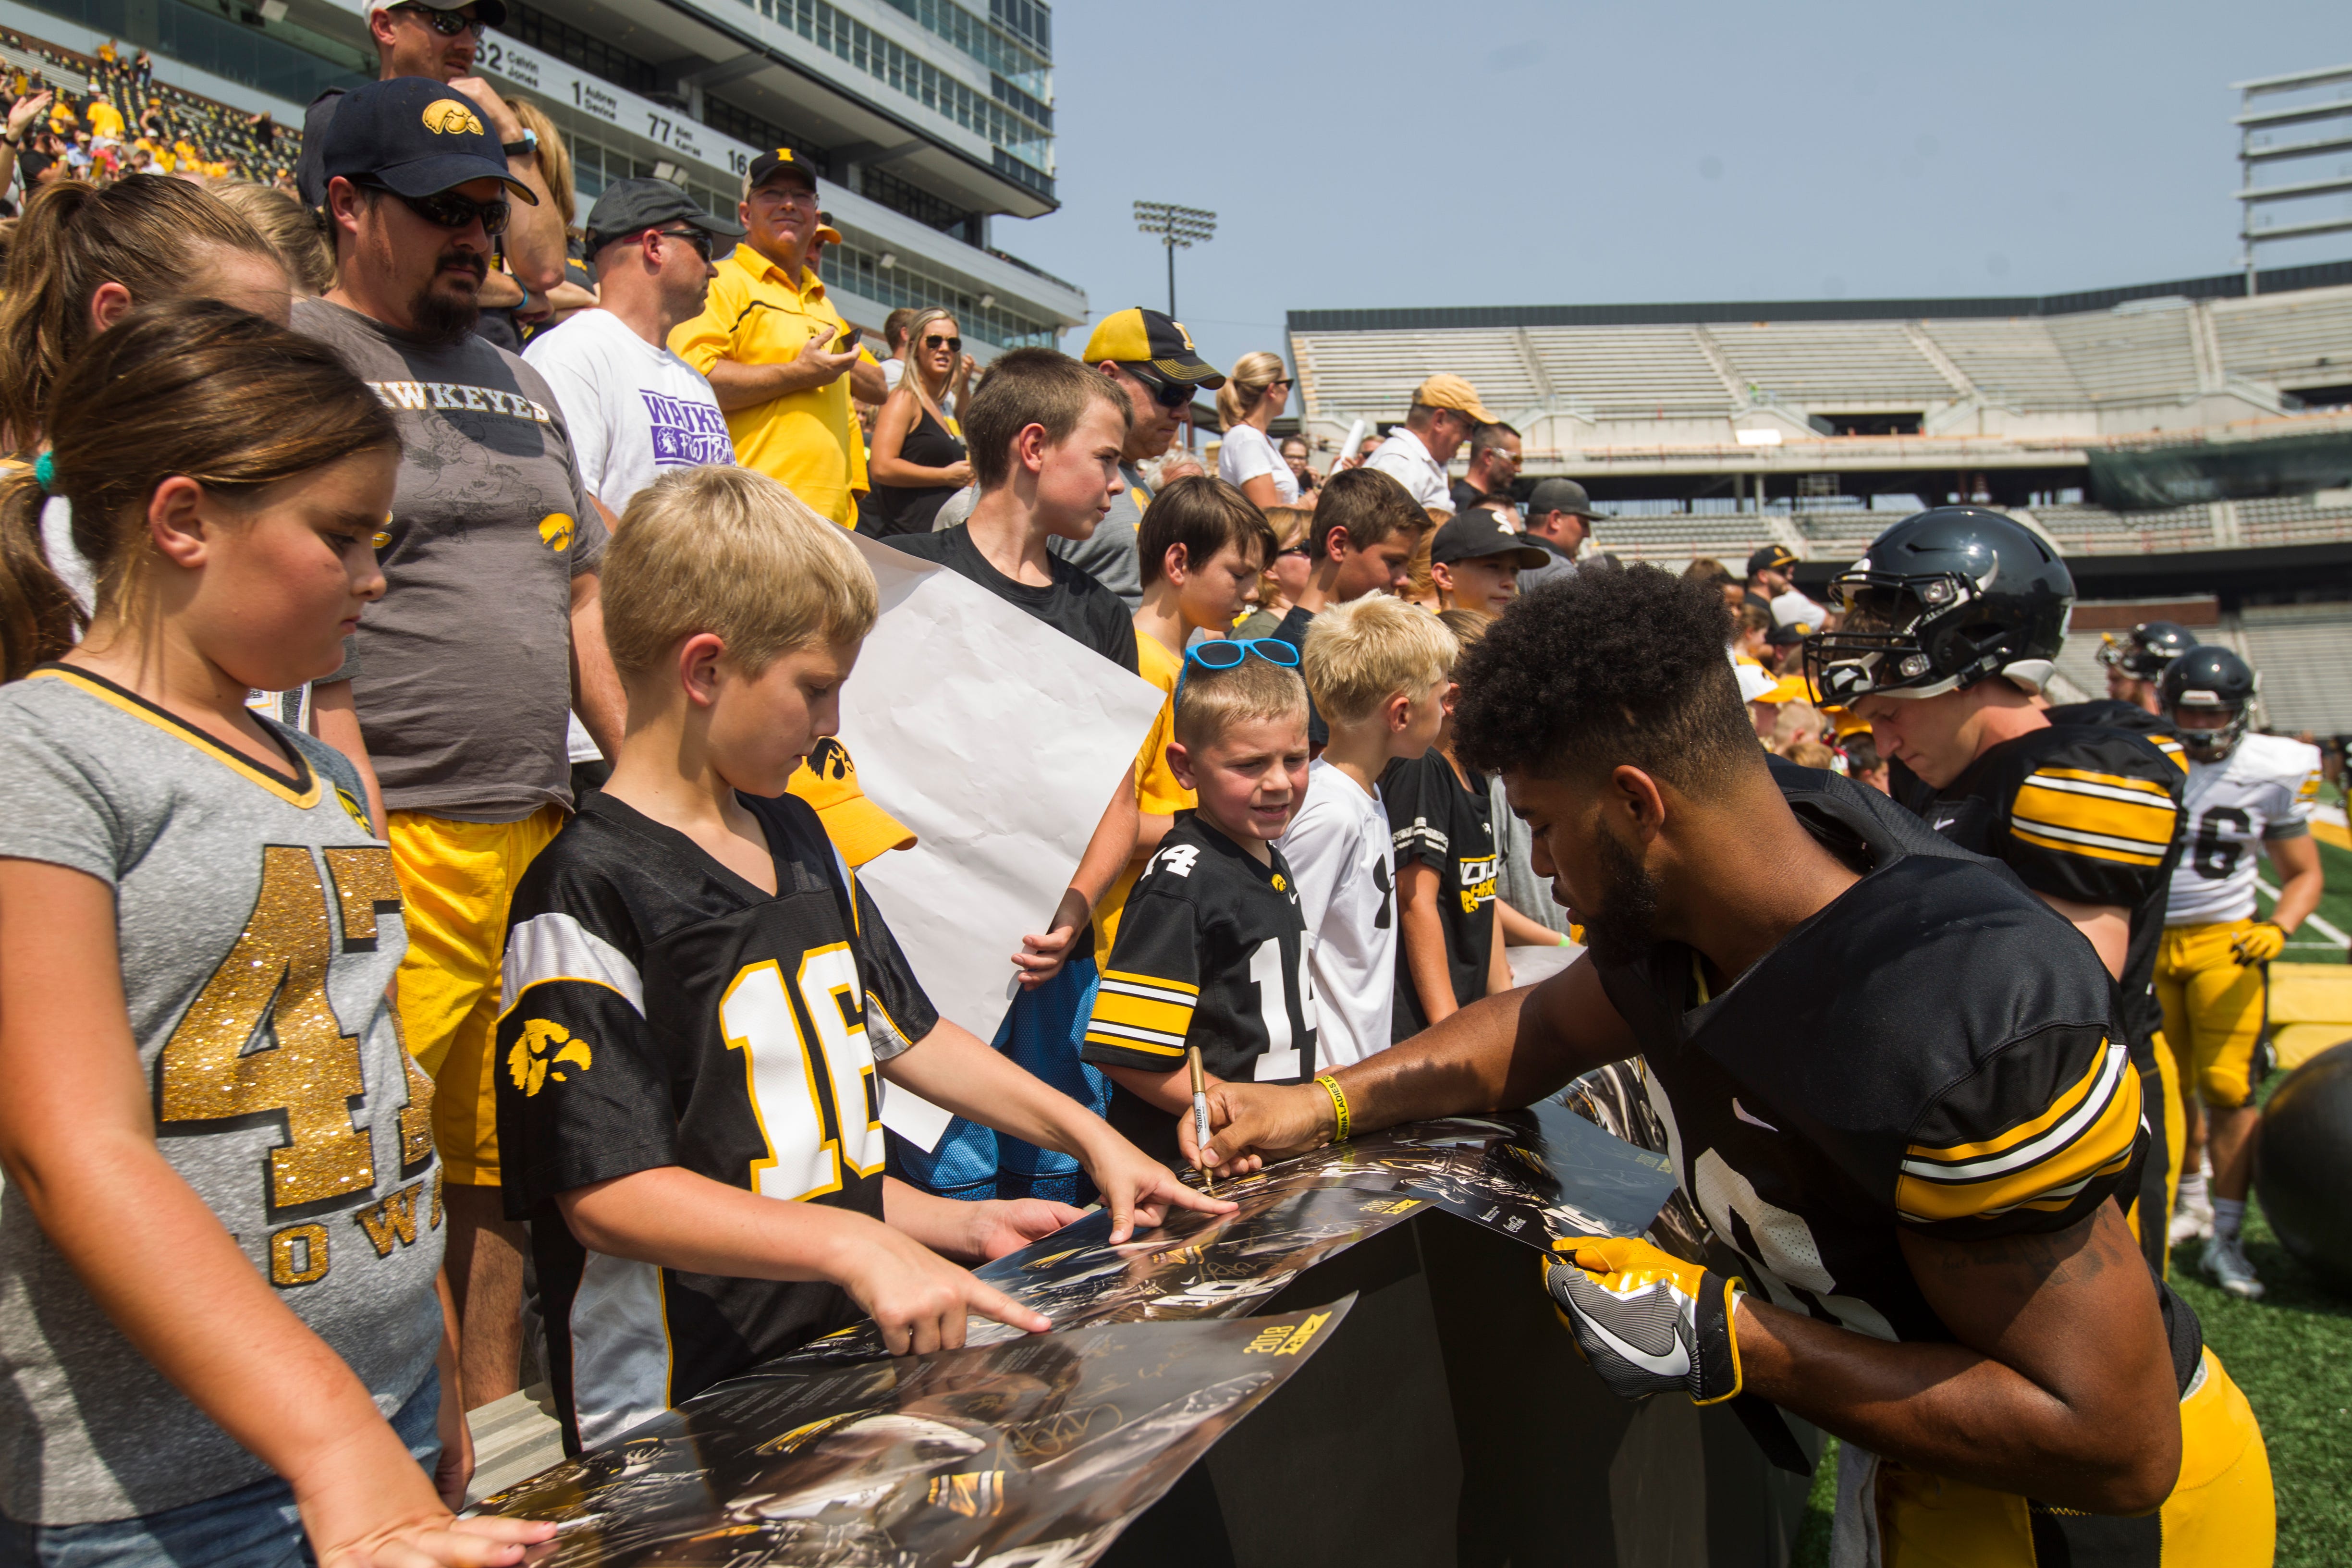 Iowa running back Toren Young signs autographs for fans during a Kids Day practice on Saturday, Aug. 11, 2018, at Kinnick Stadium in Iowa City.